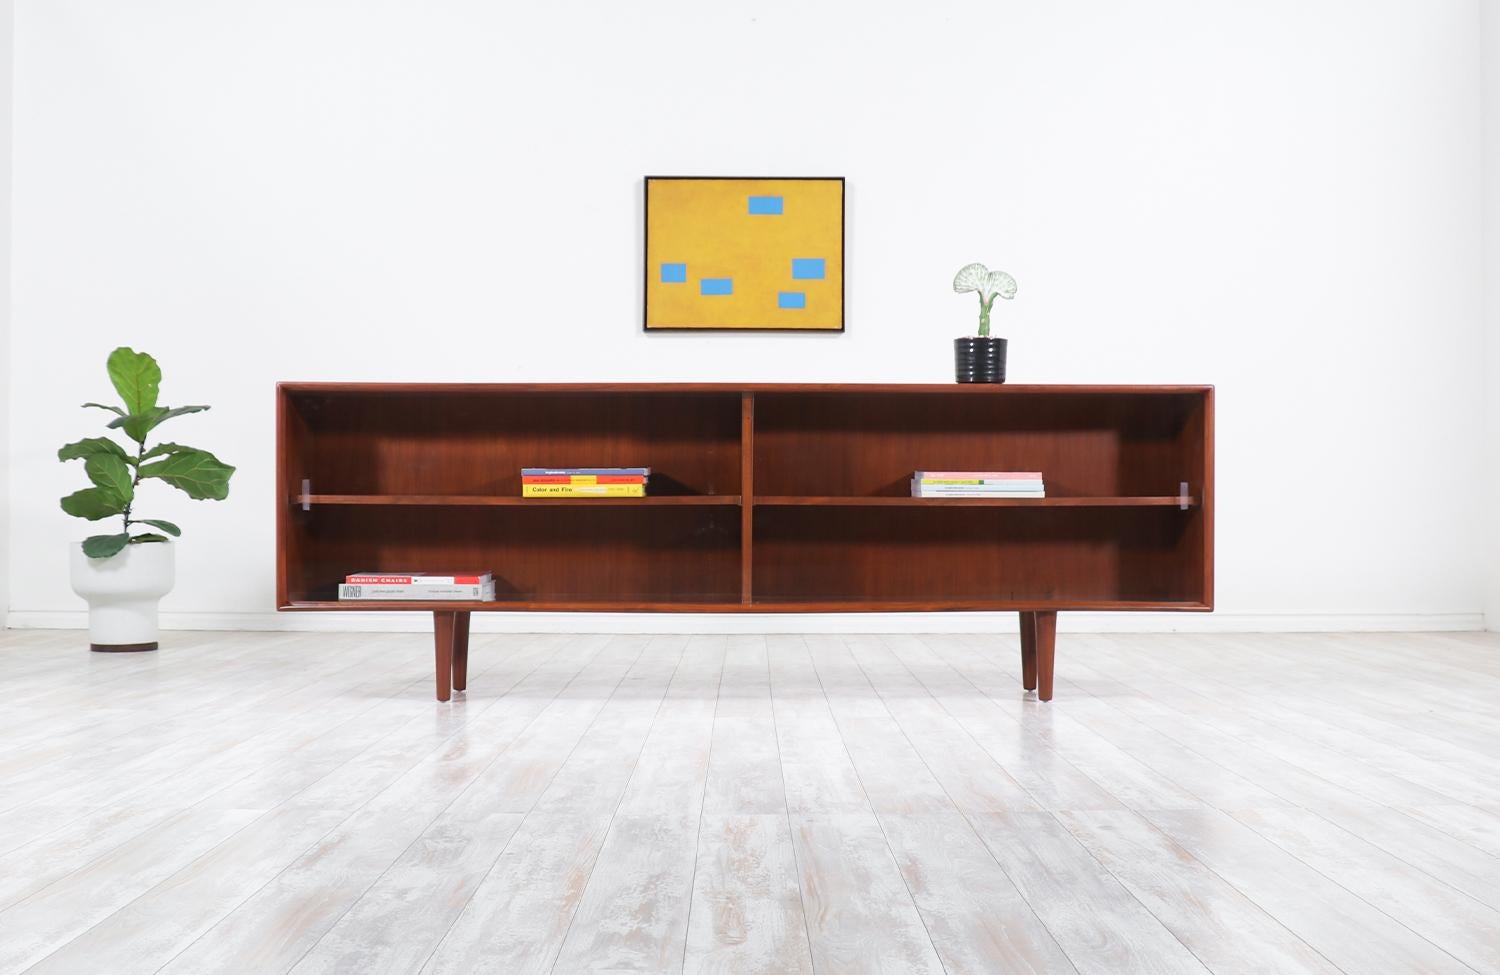 Stylish modern credenza or bookcase designed by H.P. Hansen in Denmark, circa 1960s. This skillfully crafted walnut credenza features a versatile shelved interior with three pins for quickly adjusting the interior in three different positions for